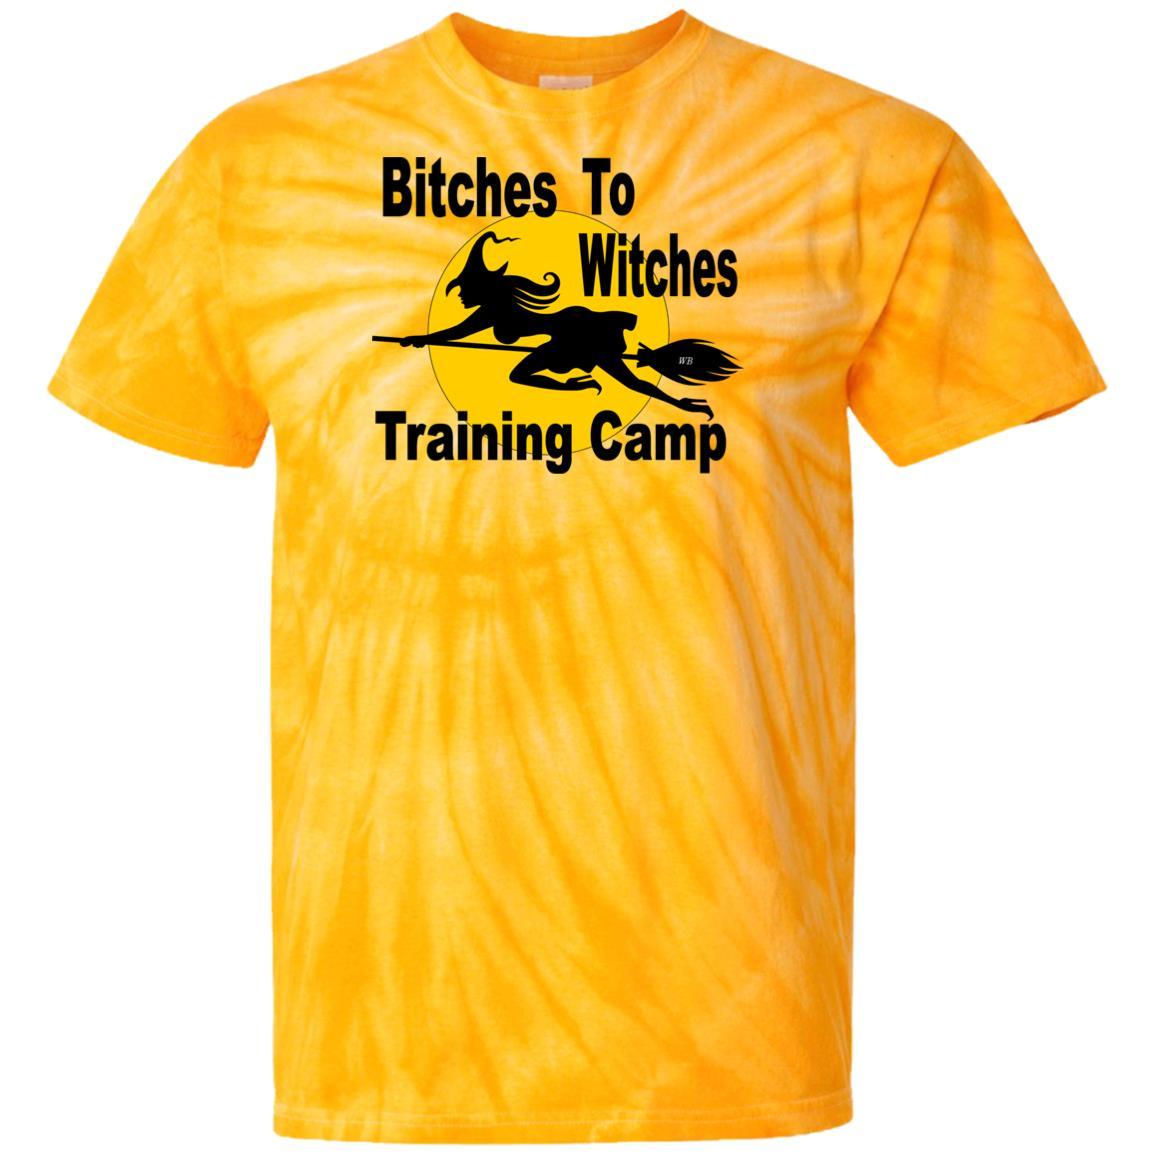 T-Shirts SpiderGold / S WineyBitches.Co "Bitches To Witches Training Camp" - 100% Cotton Tie Dye T-Shirt WineyBitchesCo